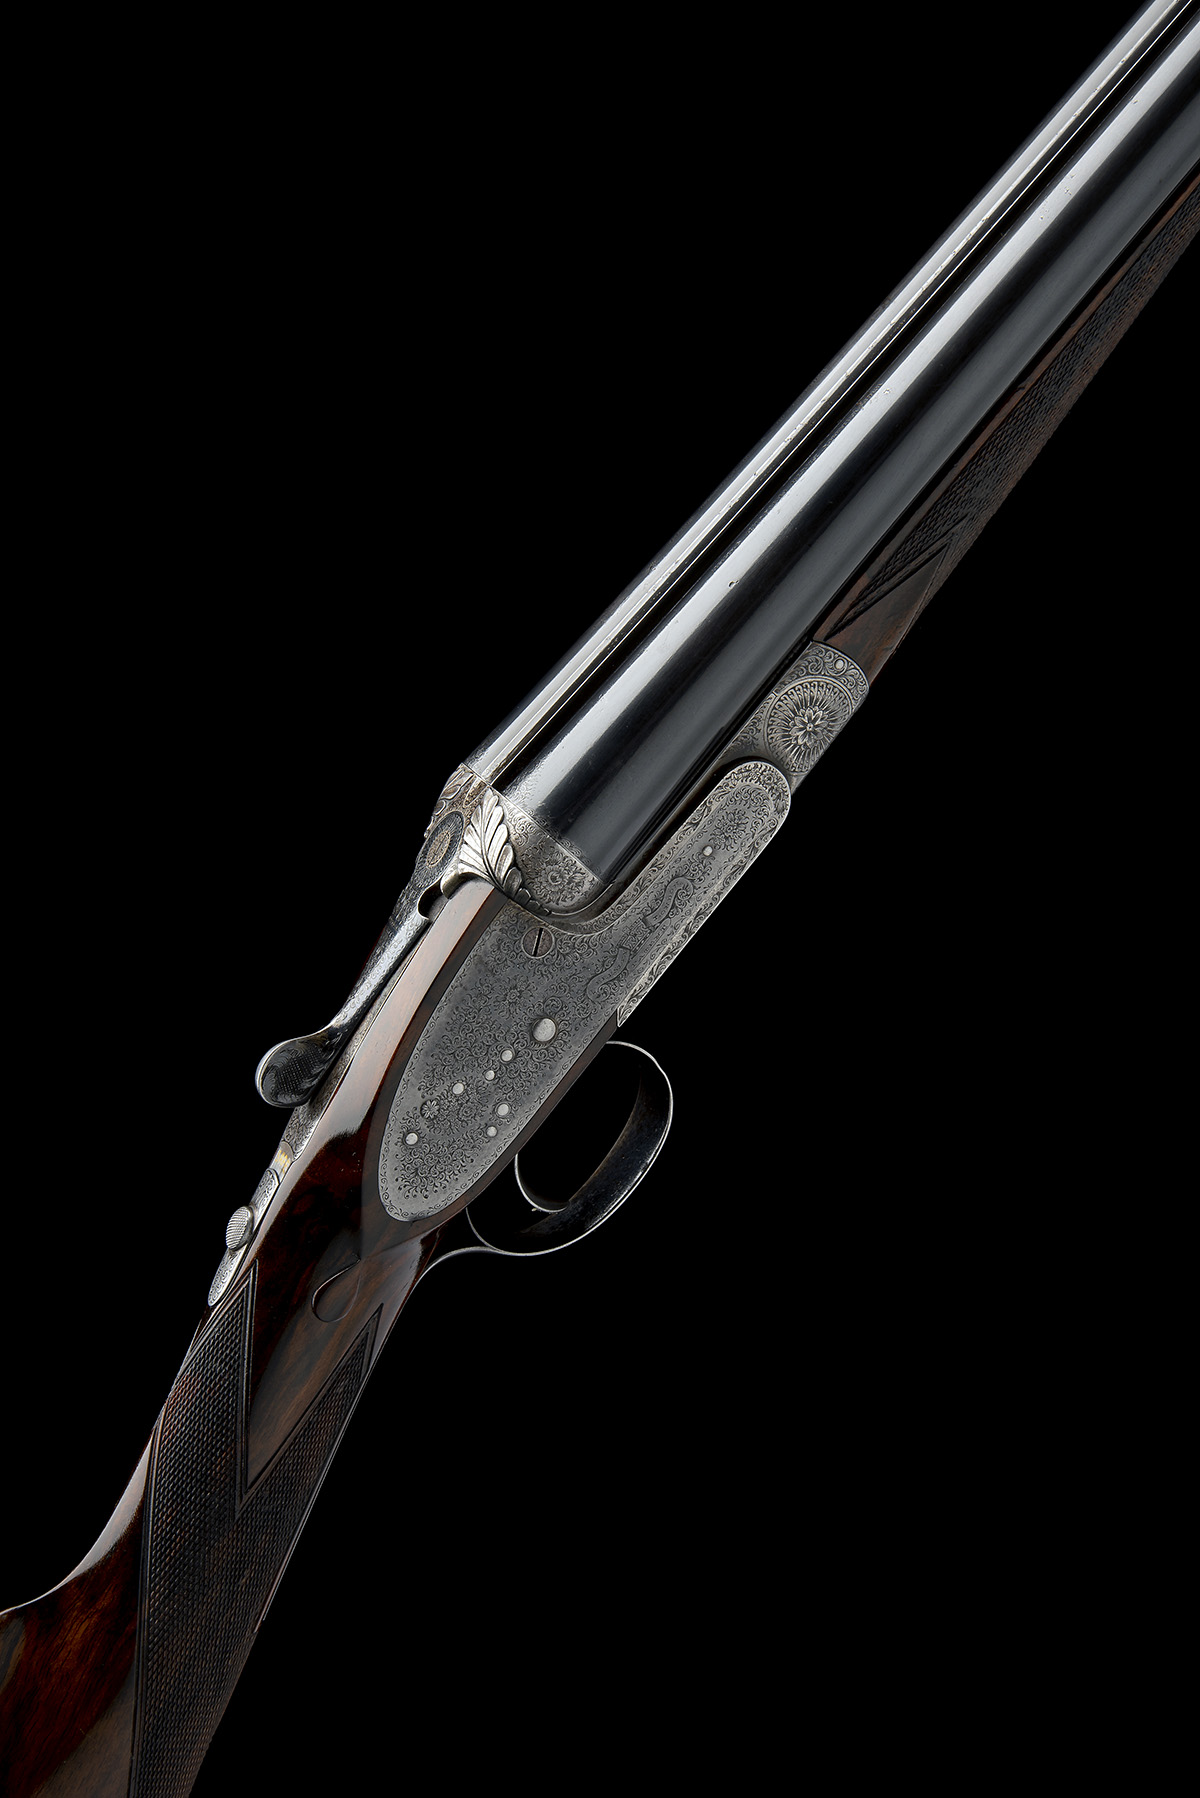 F. BEESLEY A 16-BORE SINGLE-TRIGGER SIDELOCK EJECTOR, serial no. 2050, for 1908, 28 1/2in. nitro